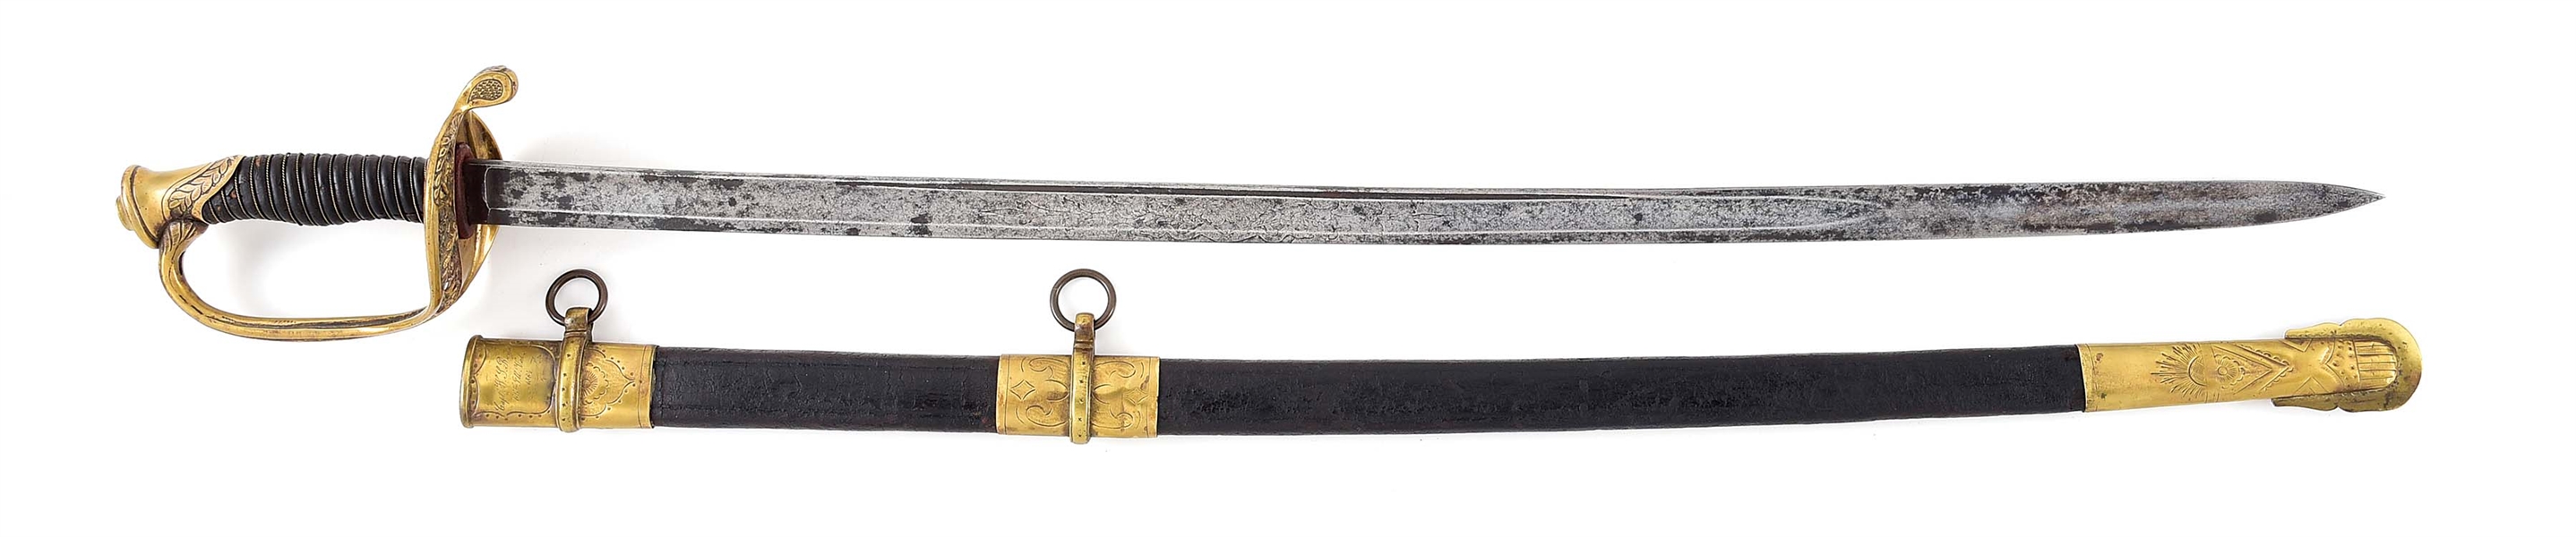 US CIVIL WAR PRESENTATION SWORD OF CAPTAIN WILLIAM S. BOYD “THE FIGHTING CAPTAIN” OF BIRGE’S WESTERN SHARPSHOOTERS